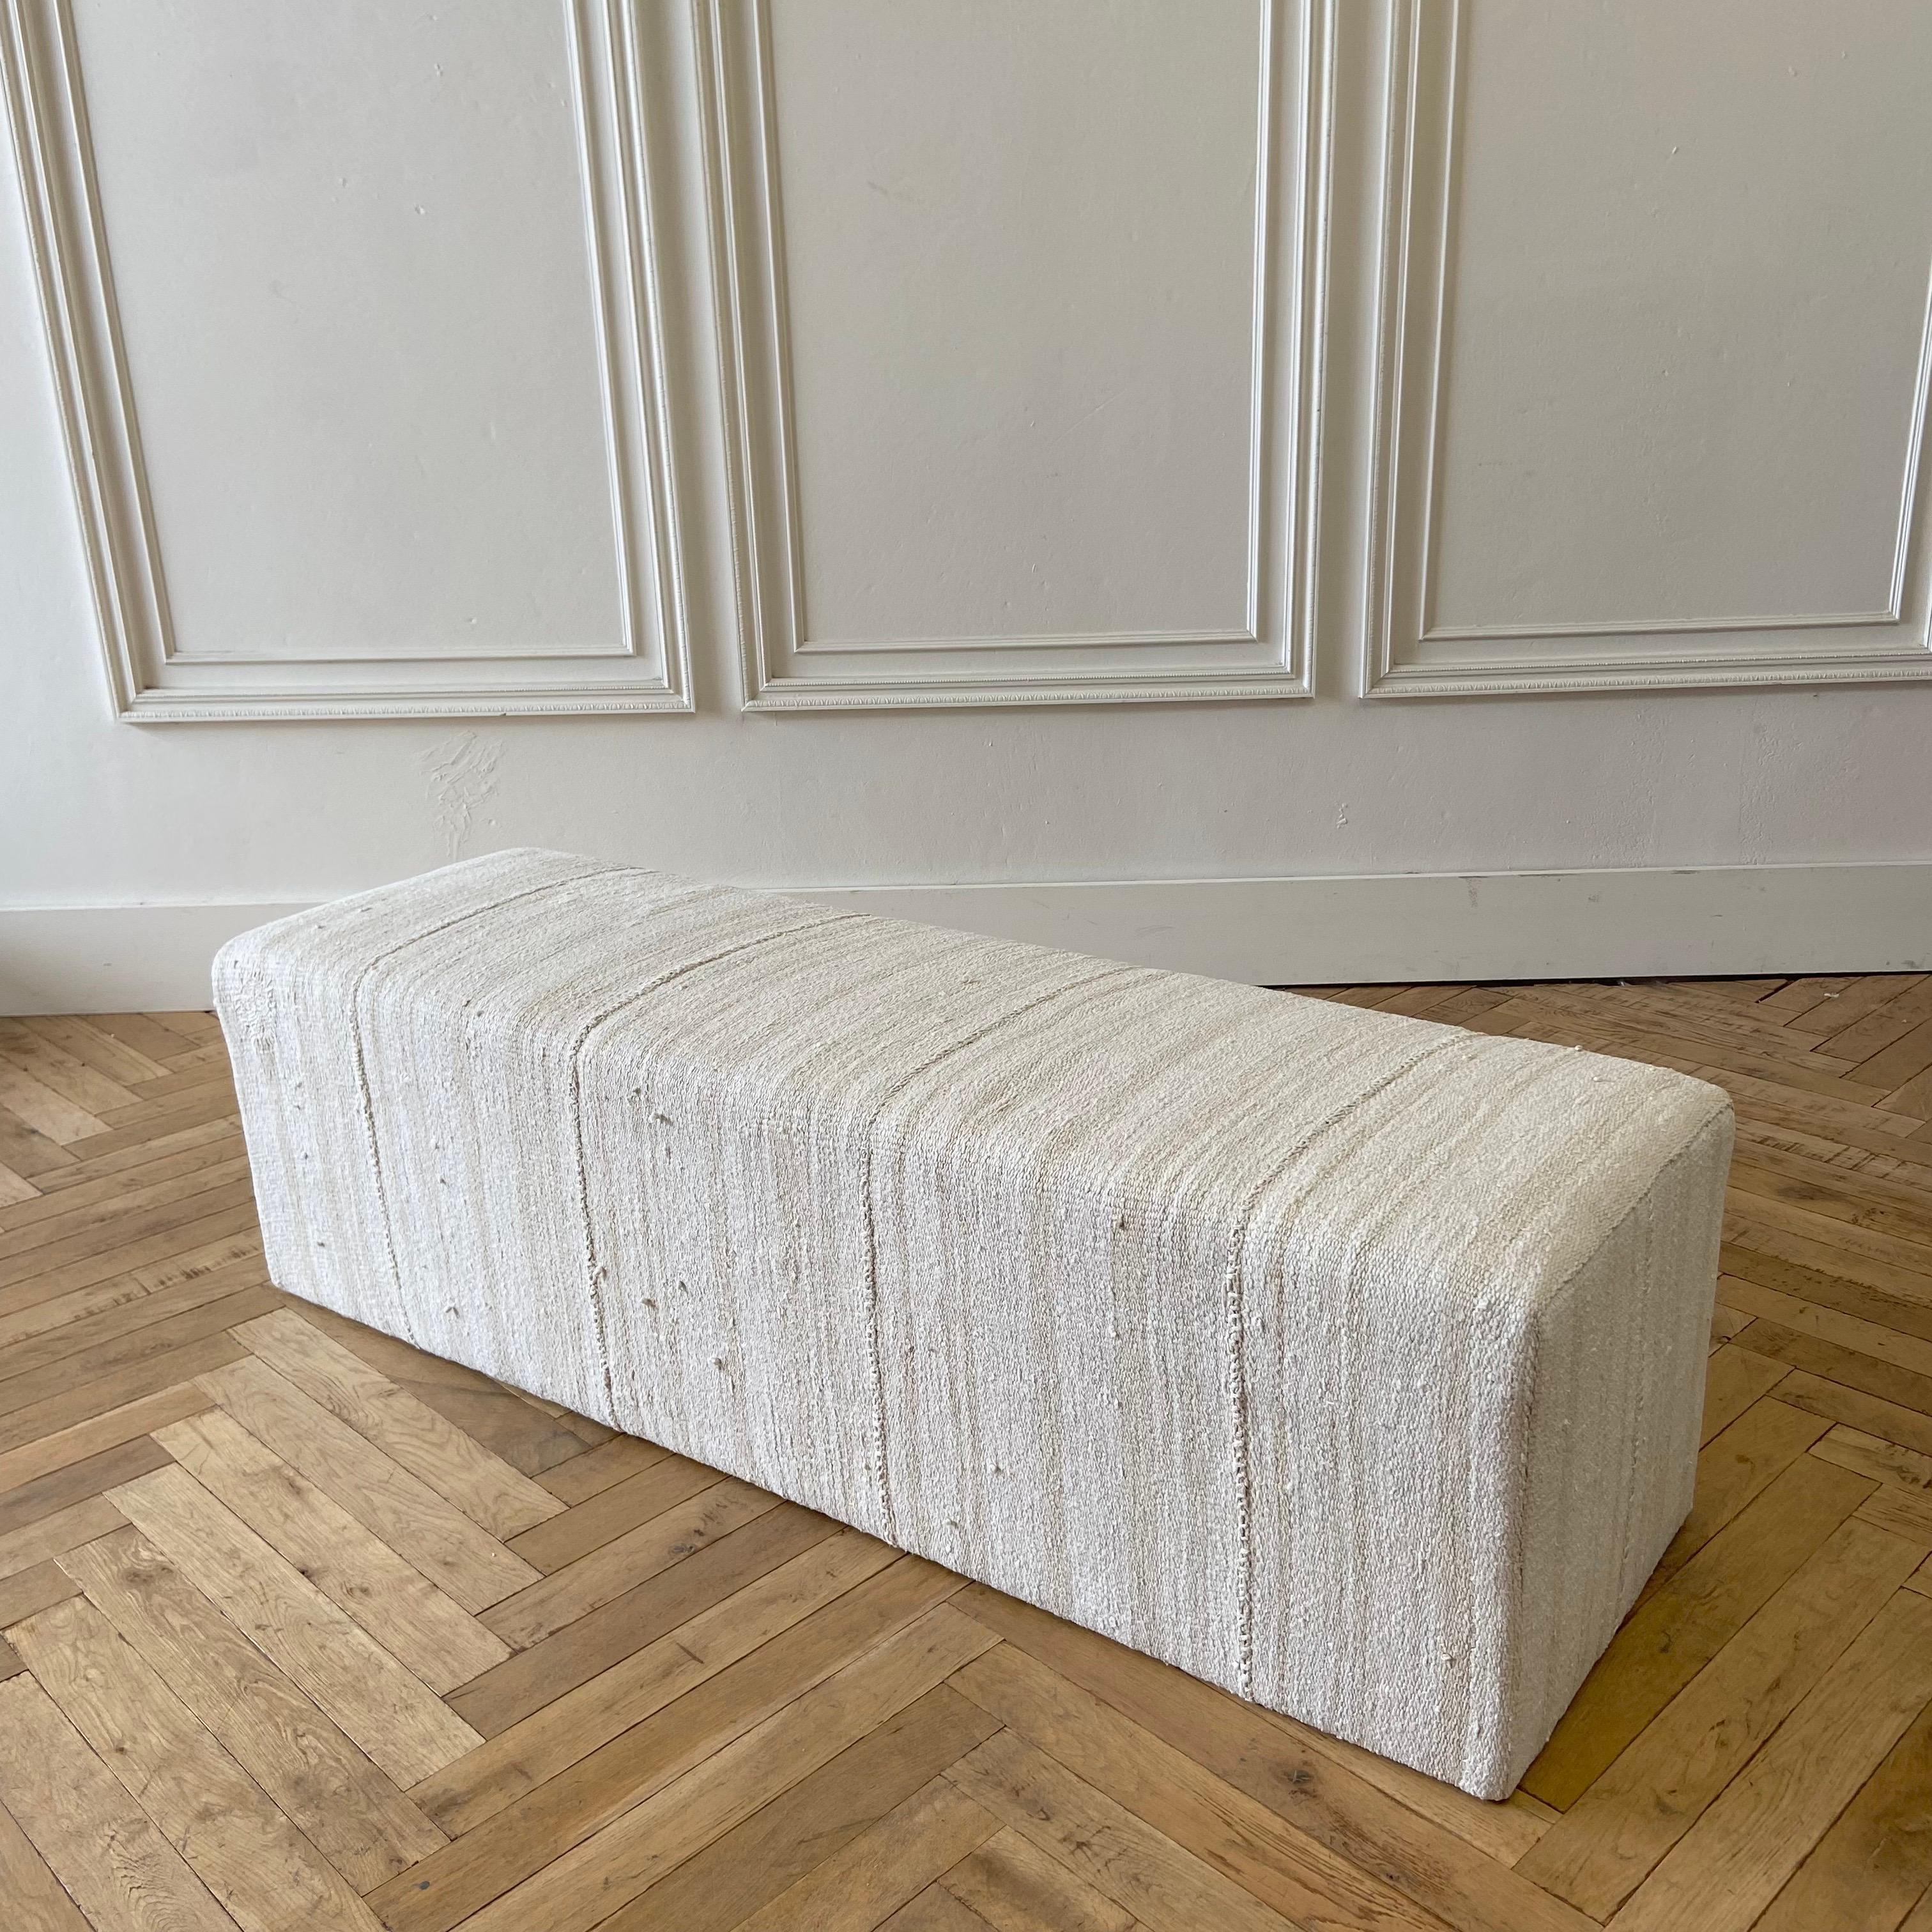 Beautiful Custom MadeCube ottoman 
Size: 60”W X 18”D X 18”H
Made from a vintage turkish hemp and wool rug, in an off white, with faded stripes.
The stripes are faded taupe/brown, and can appear as a dijon coloring in some lights.
Original seams,